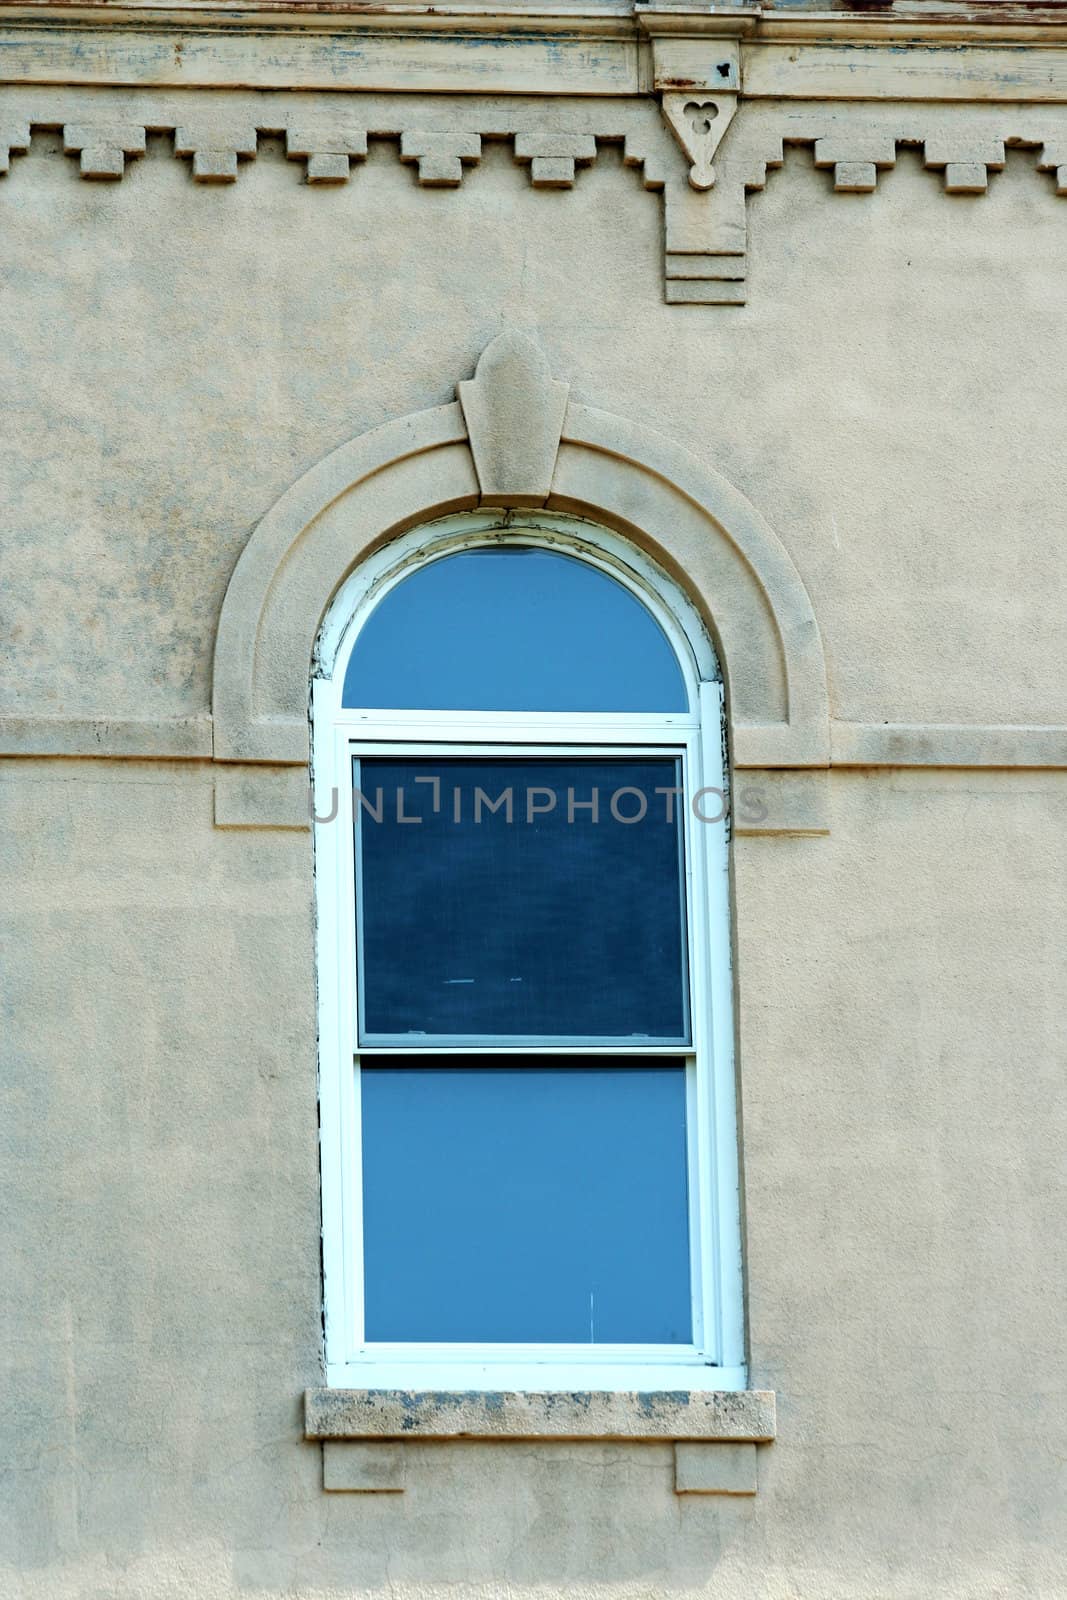 A window on the side of a building